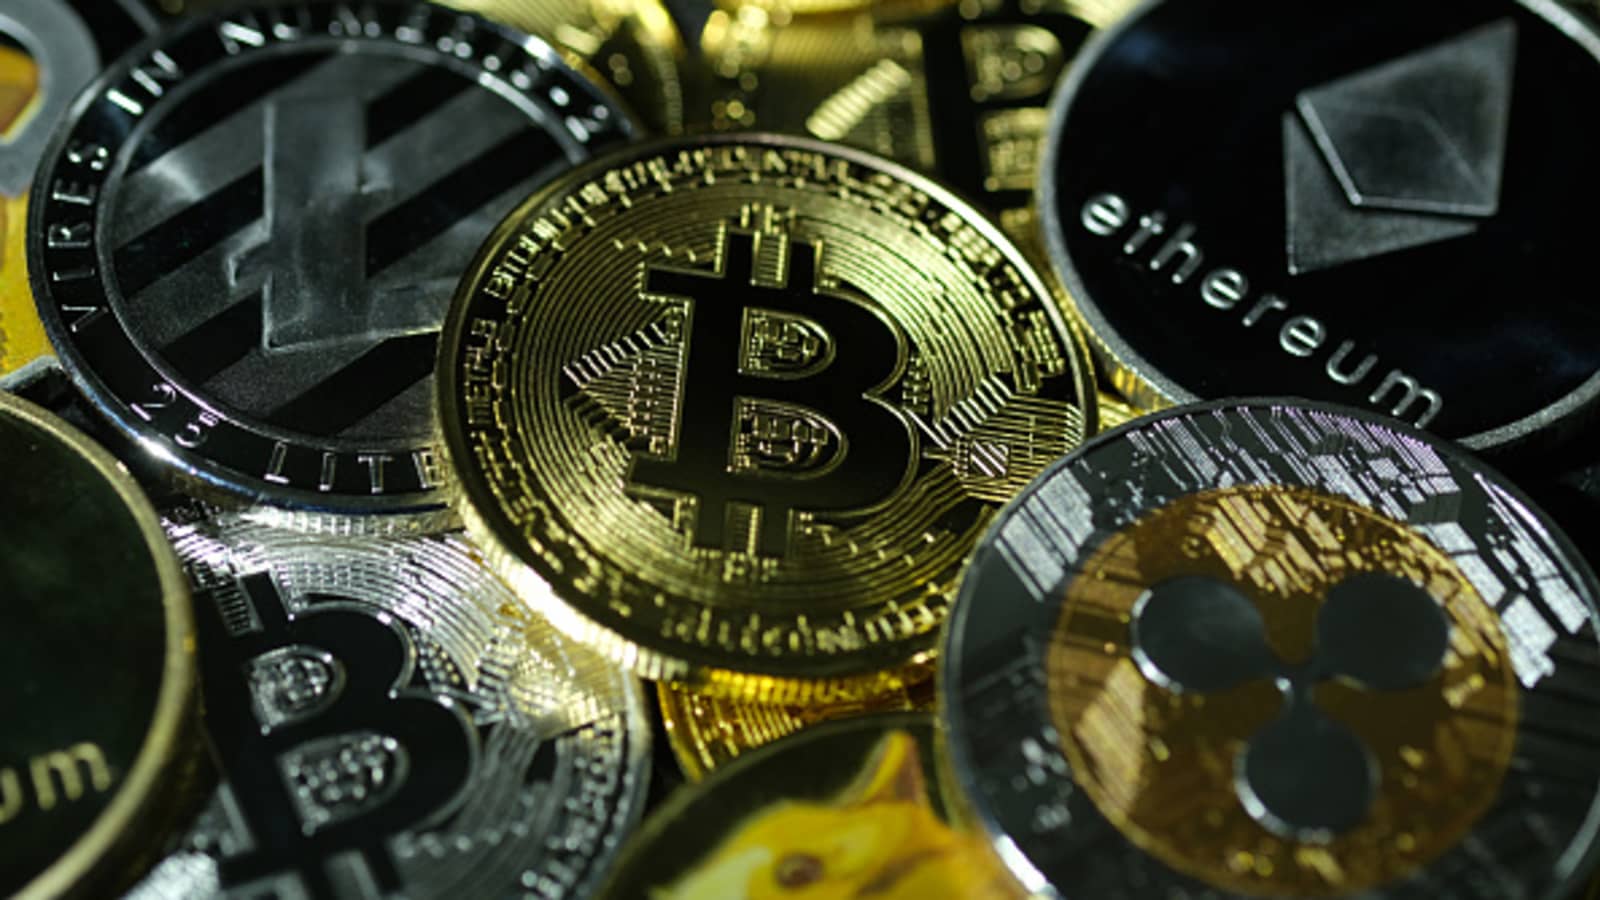 Cryptocurrencies can be a tool for building personal wealth long-term